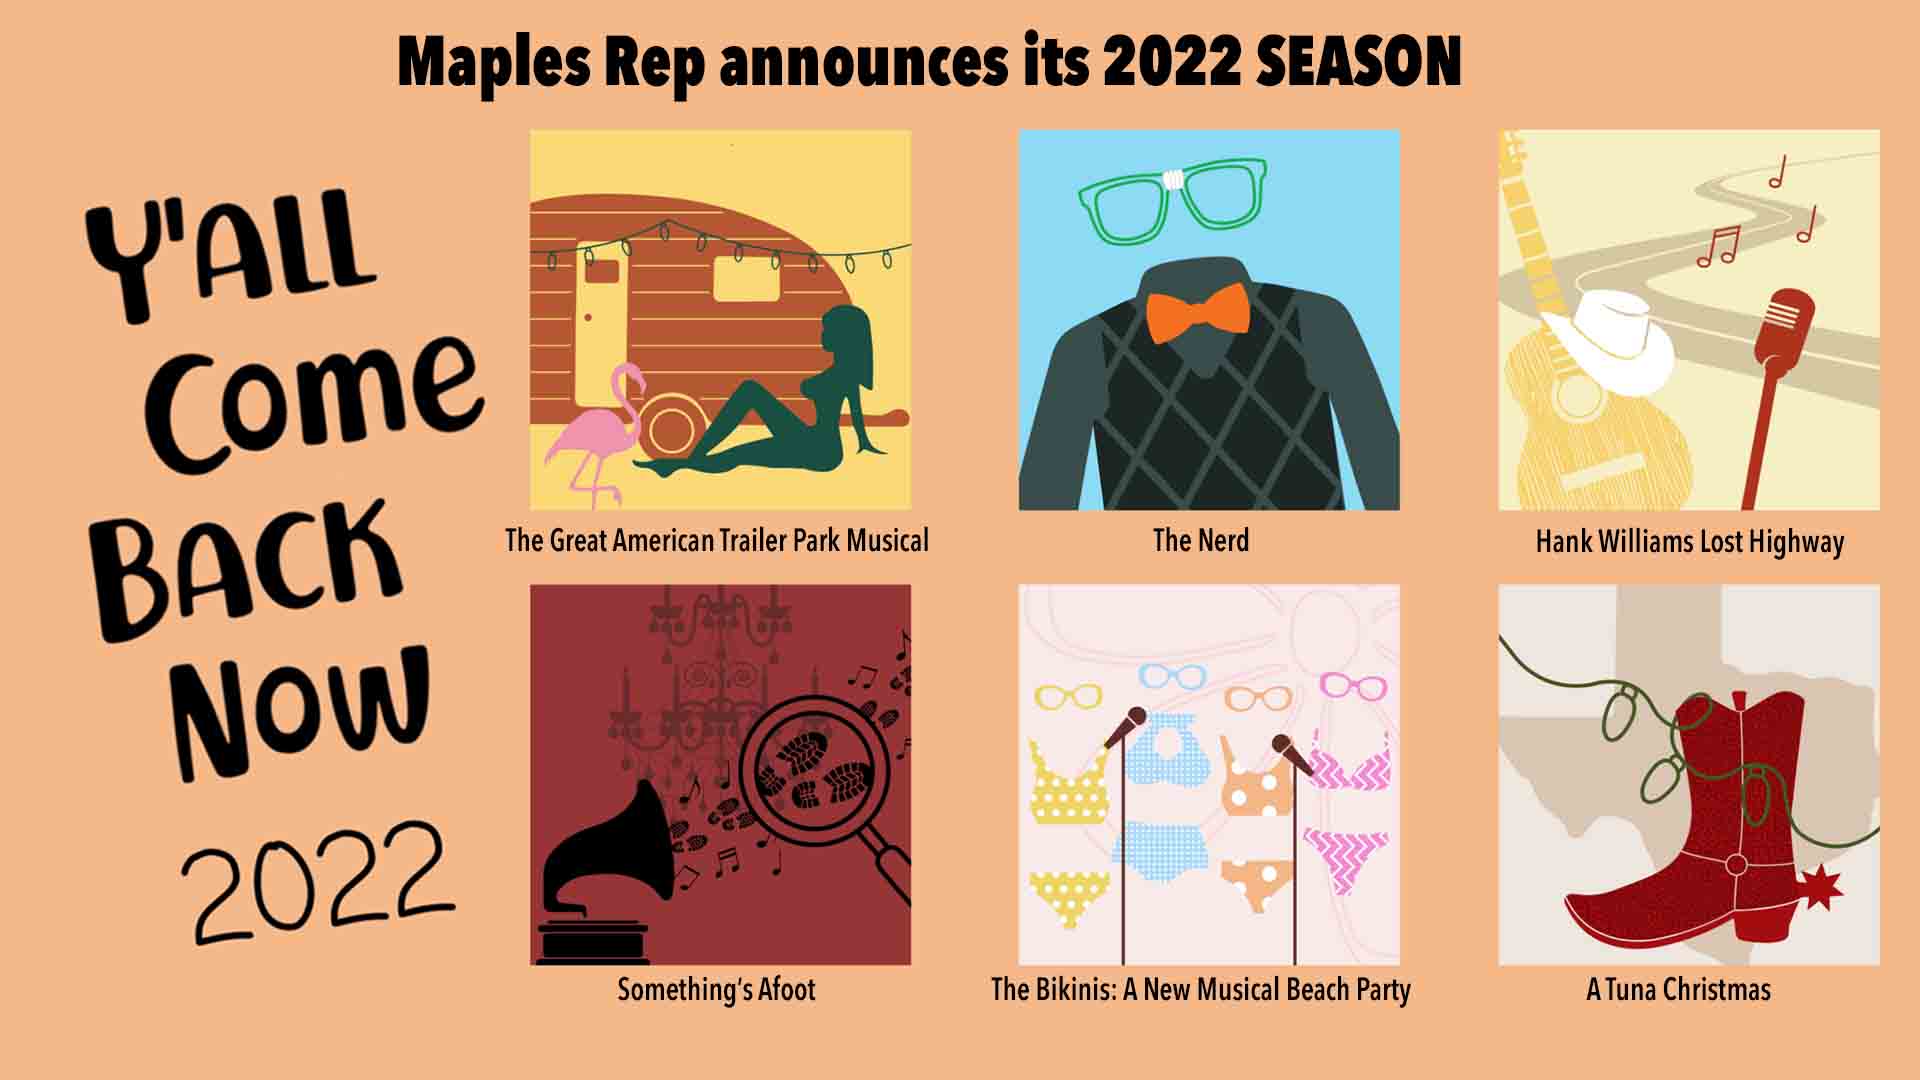 Y’all Come Back Now! Maples Repertory Theatre announces its 2022 Season